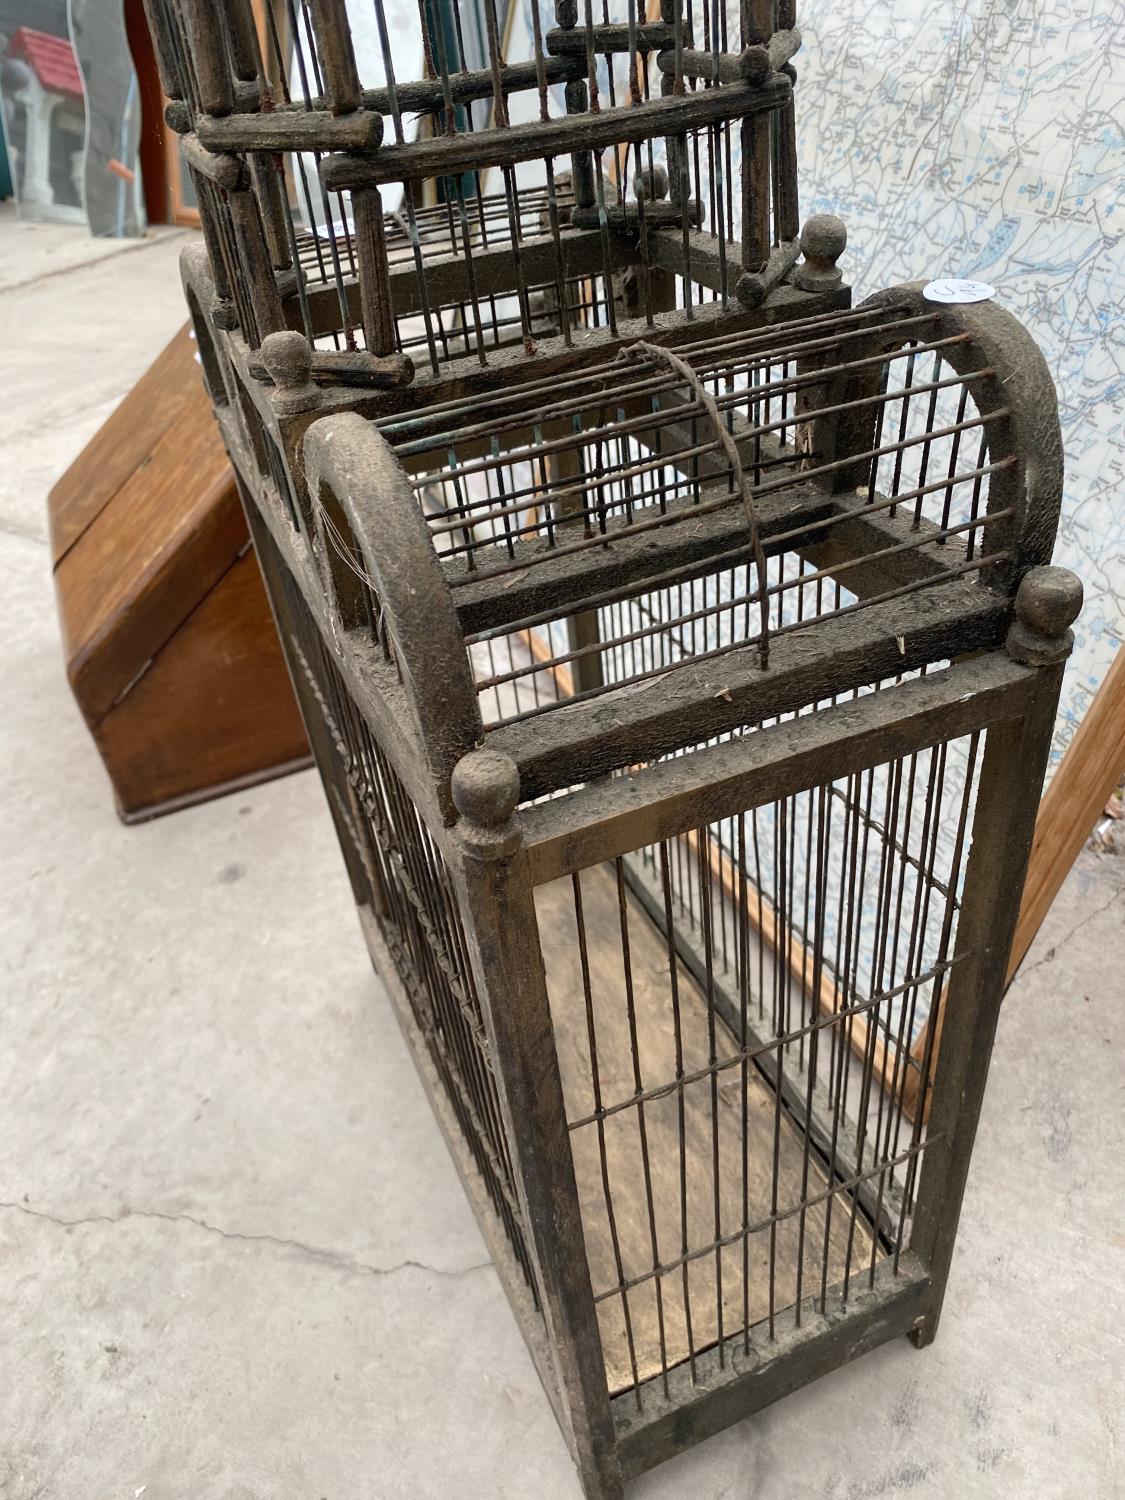 A VINTAGE AND DECORATIVE BIRD CAGE - Image 2 of 3